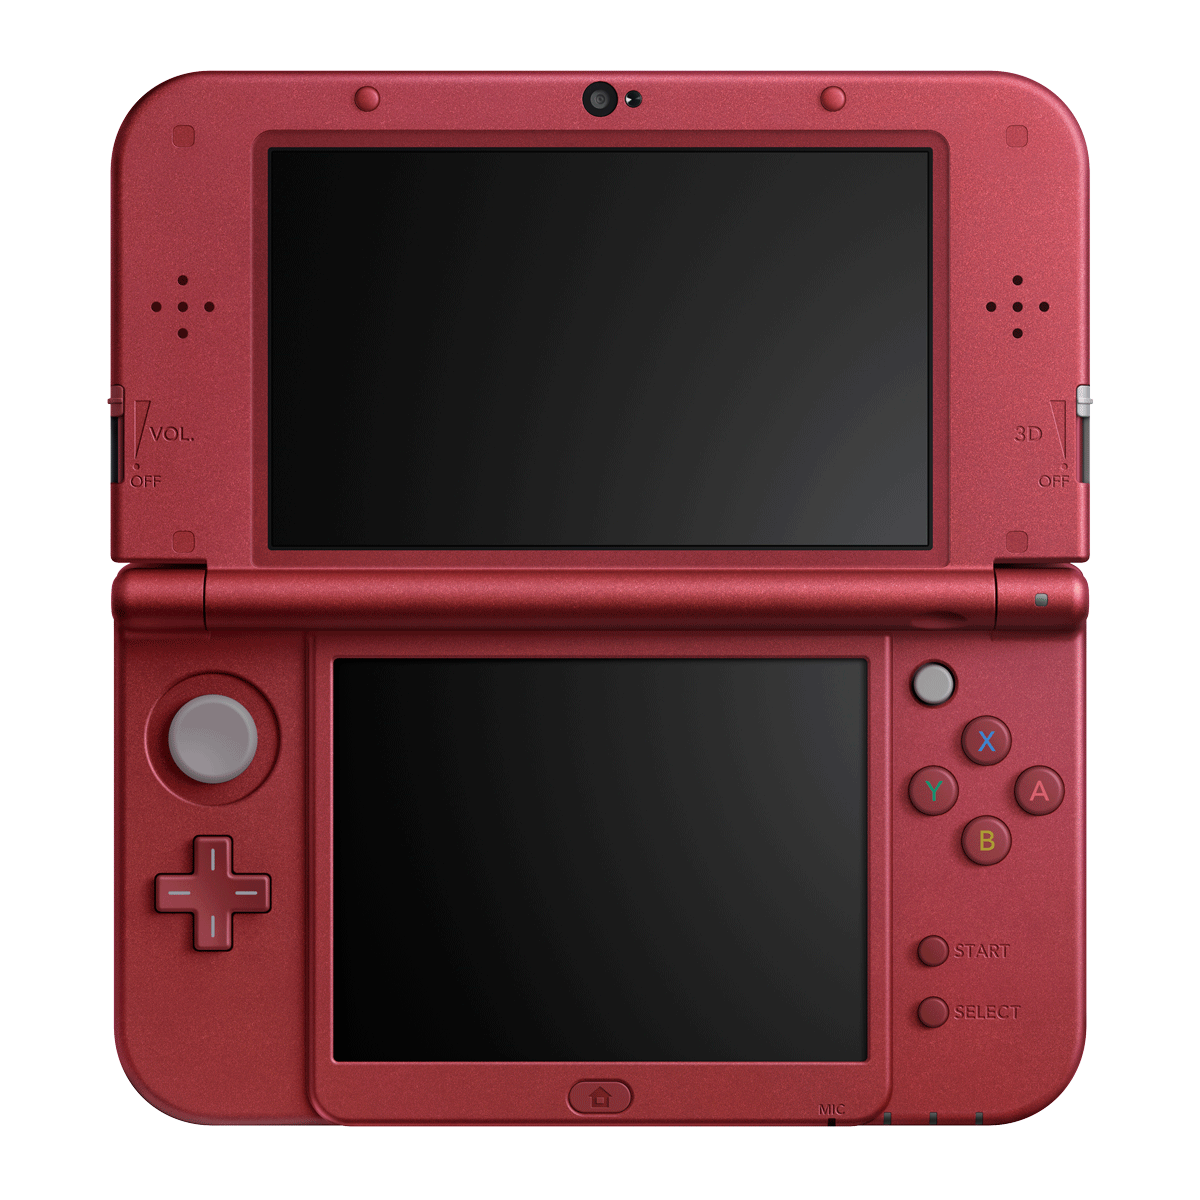 The Nintendo 3DS handheld console